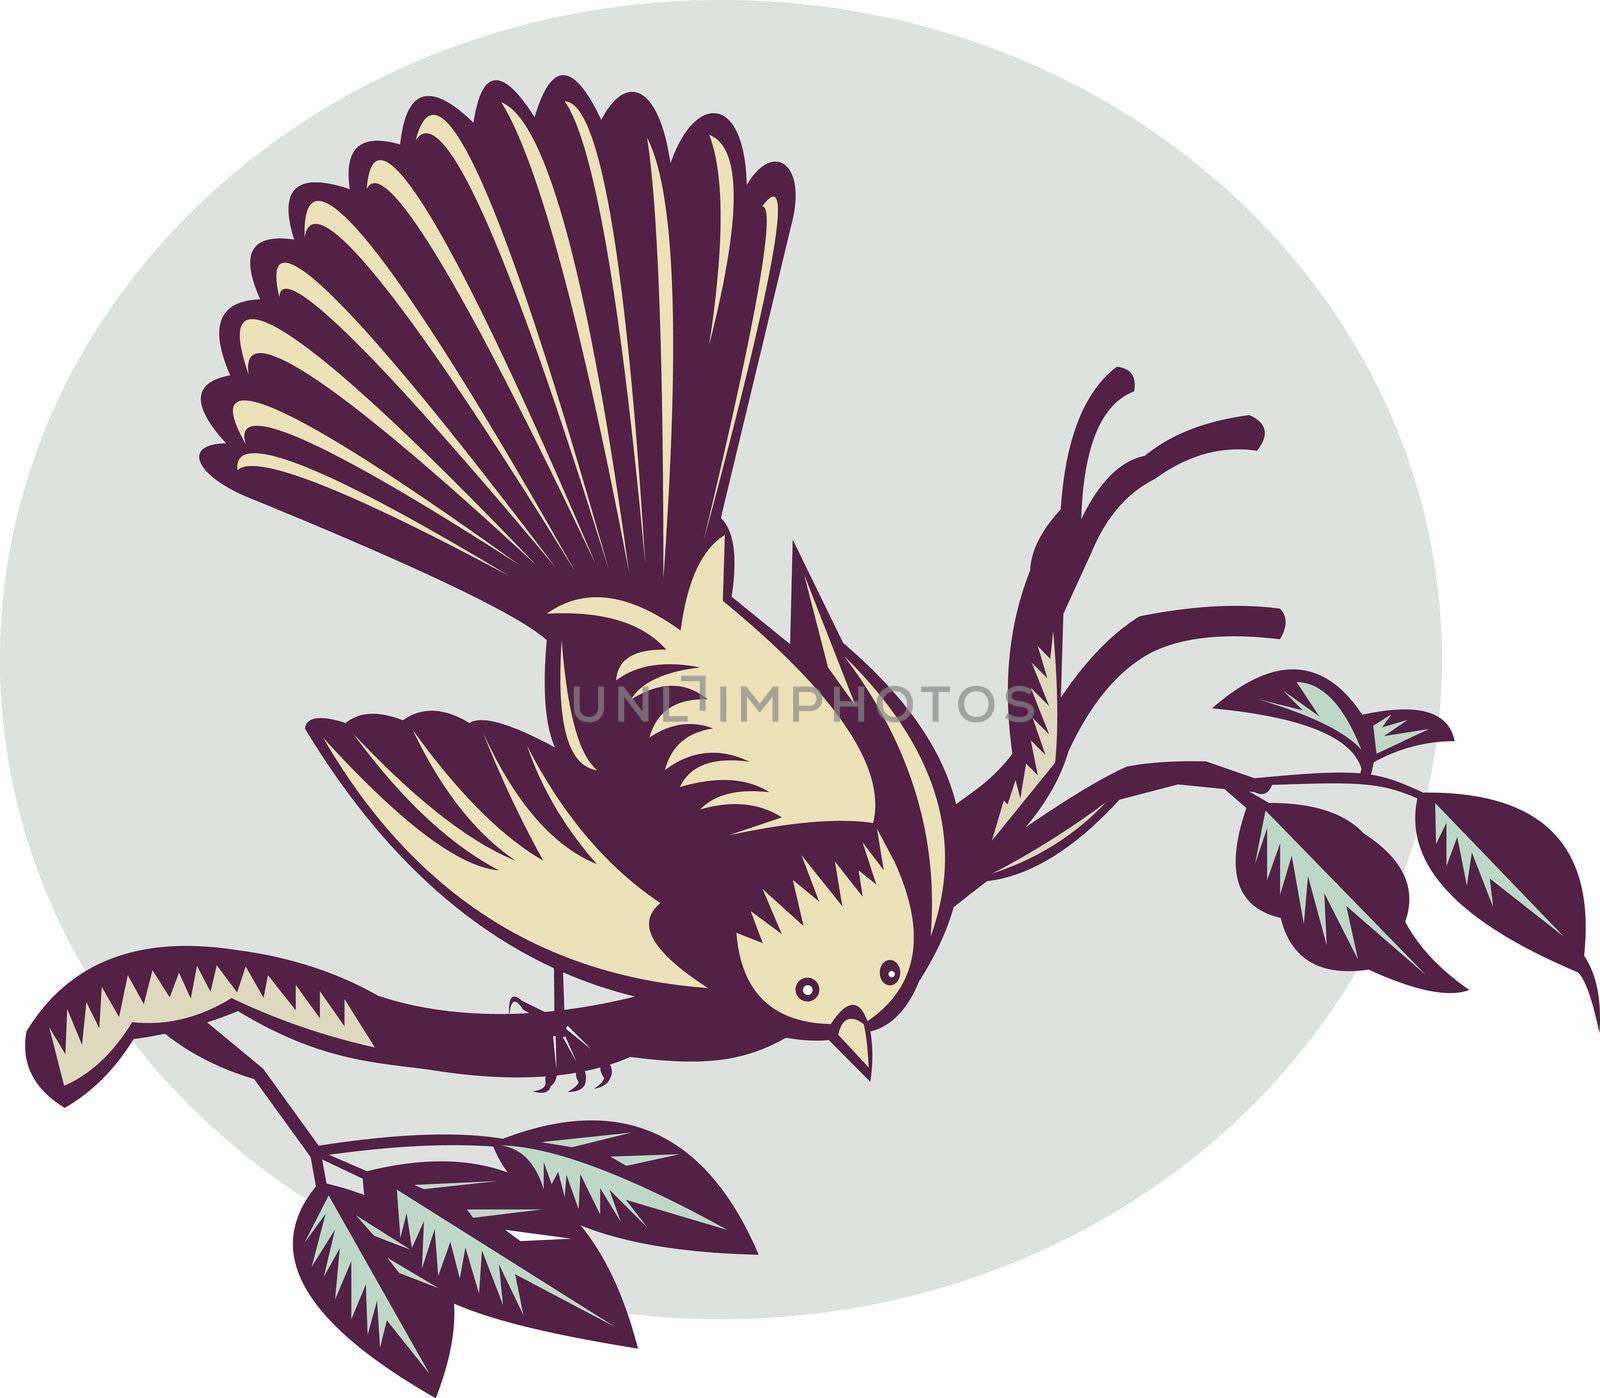 illustration of a New Zealand fantail bird on a branch done in retro woodcut style.